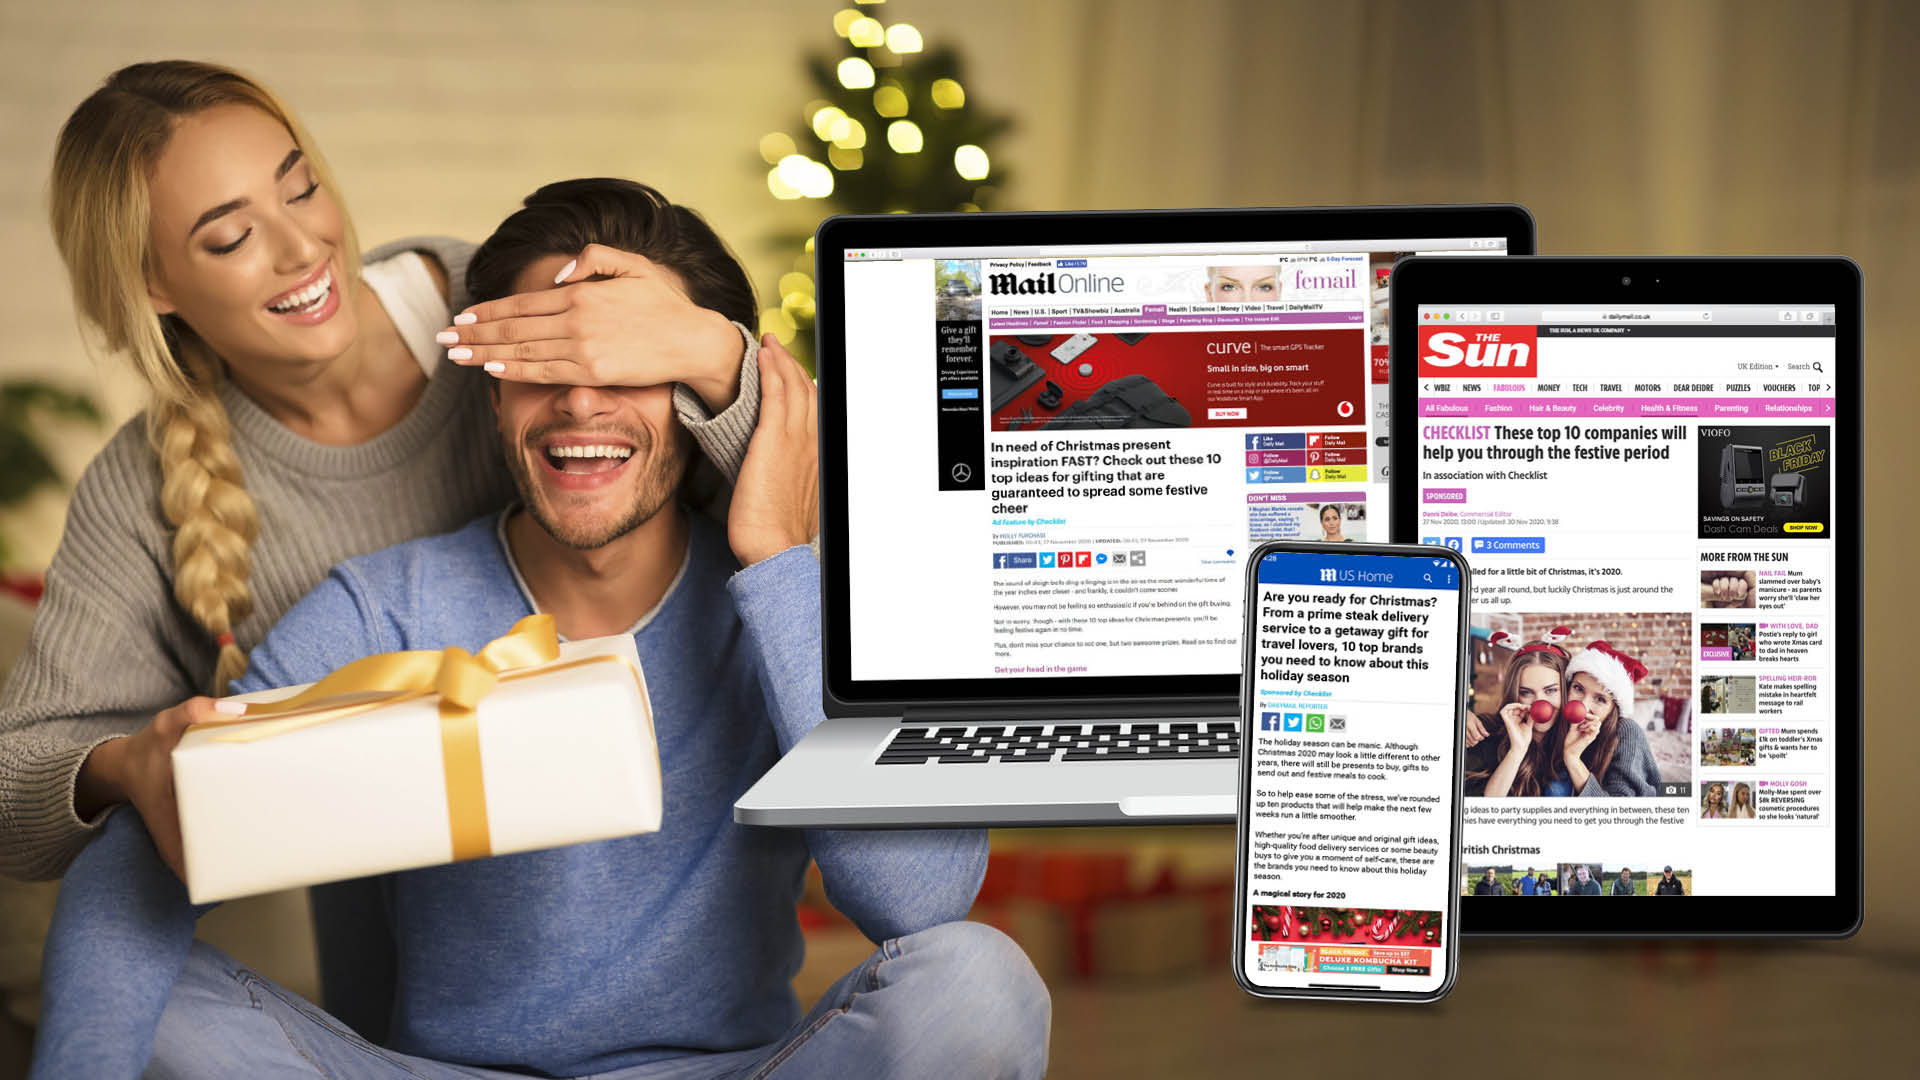 Christmas gift ideas from MailOnline, Dailymail.com and Sun Online